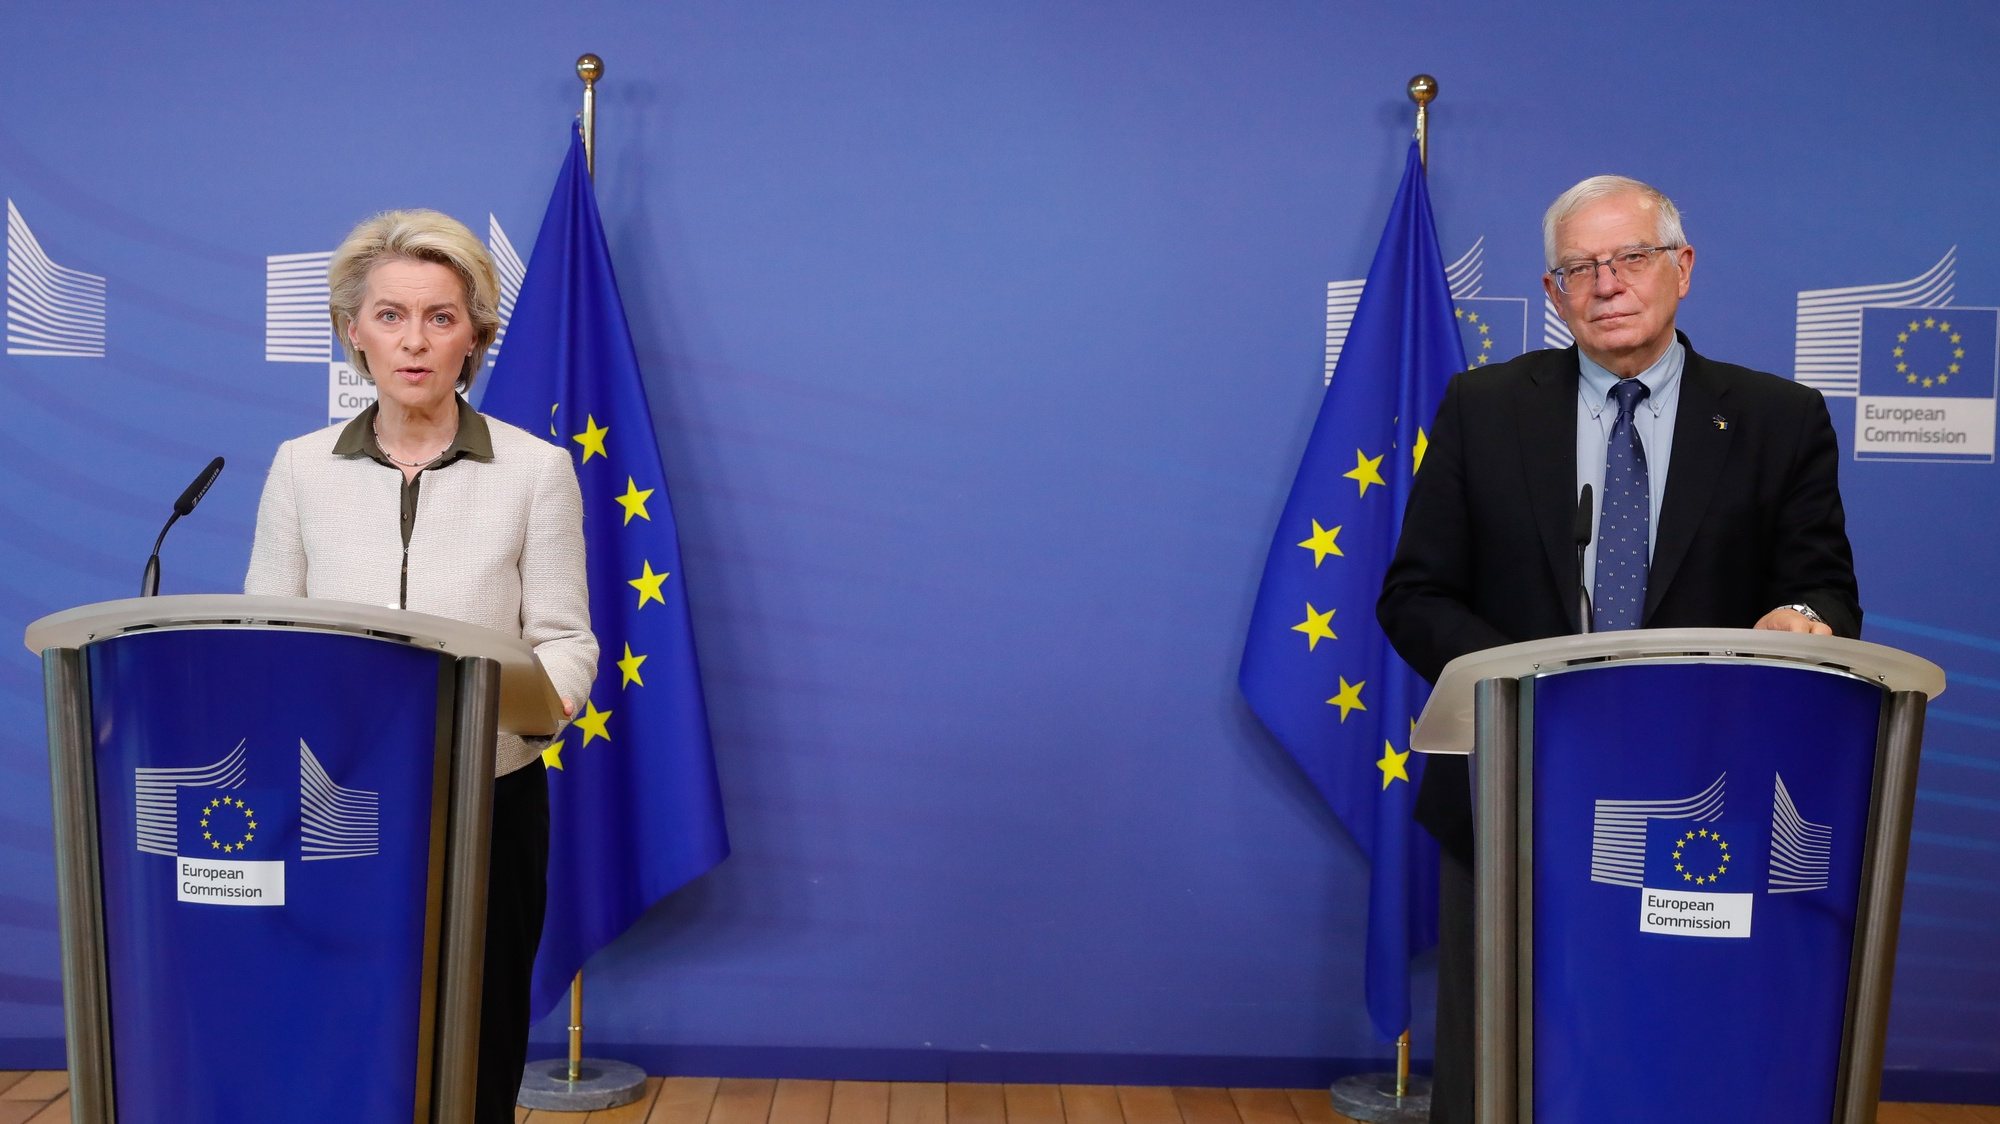 epa09789542 European Commission President Ursula von der Leyen (L) and European Union for Foreign Affairs and Security Policy Josep Borrell (R) give a joint press statement on further measures to respond to the Russian invasion of Ukraine, at the European Commission in Brussels, Belgium, 27 February 2022. Von der Leyen announced the EU will shut down its airspace to Russian planes, ban Russian state media outlets RT and Sputnik, and buy and send weapons to Ukraine. Russian troops entered Ukraine on 24 February prompting the country&#039;s president to declare martial law and triggering a series of announcements by Western countries to impose severe economic sanctions on Russia.  EPA/STEPHANIE LECOCQ / POOL